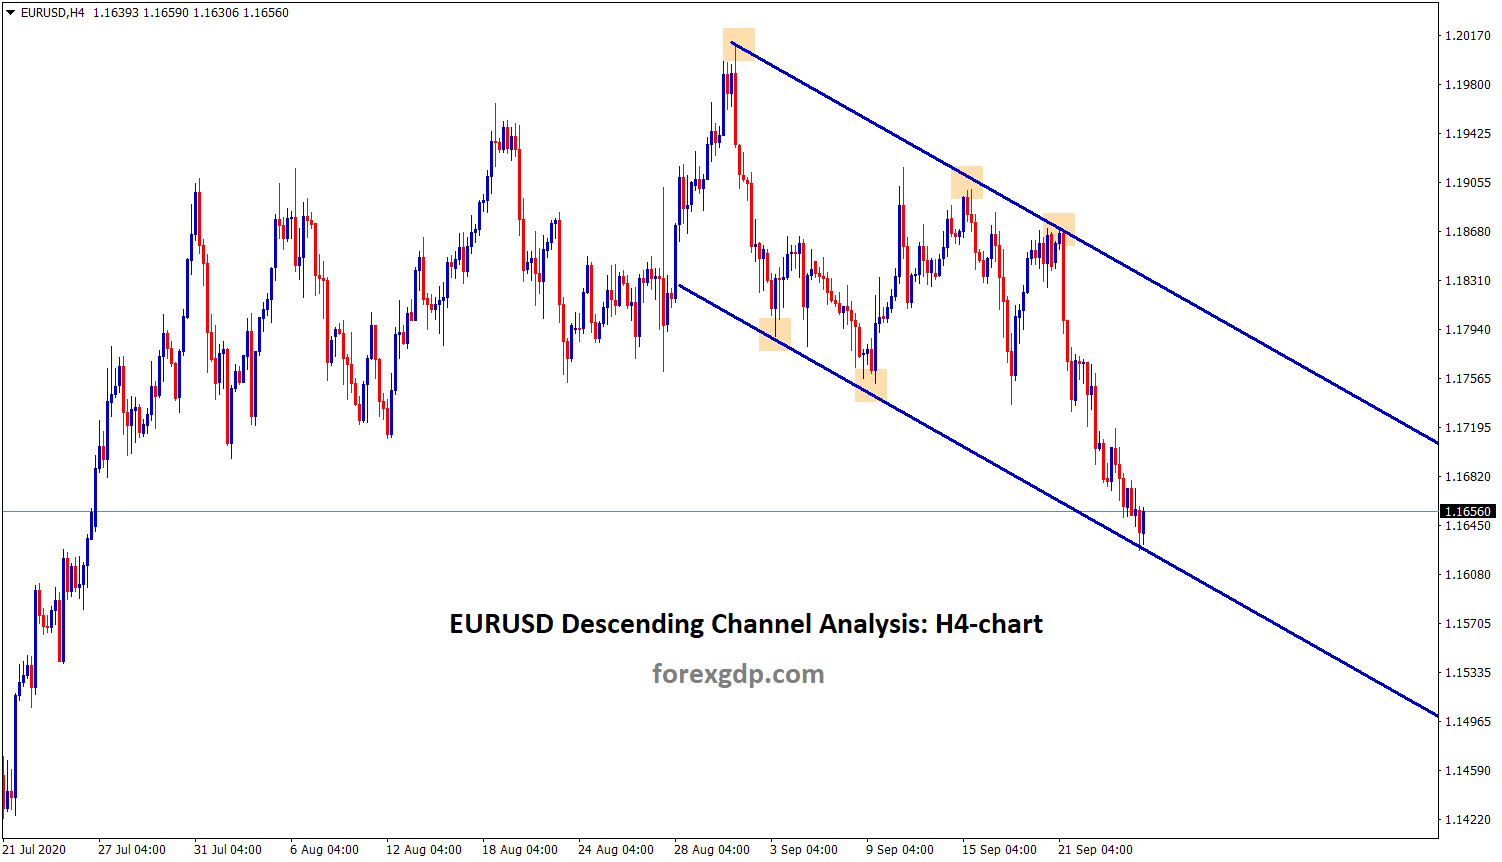 eurusd descending channel analysis in h4